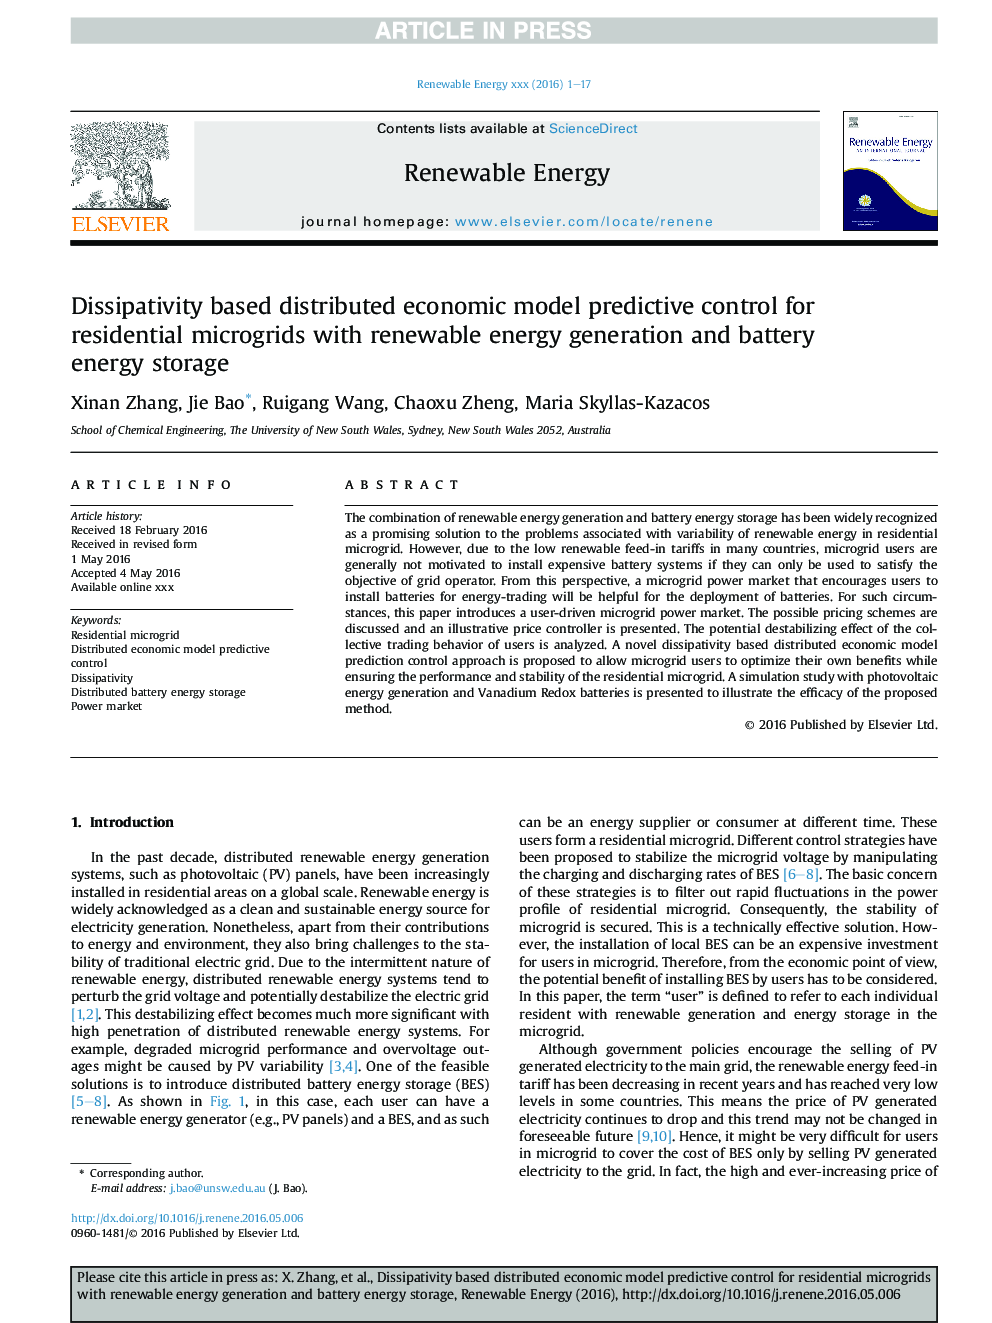 Dissipativity based distributed economic model predictive control for residential microgrids with renewable energy generation and battery energy storage